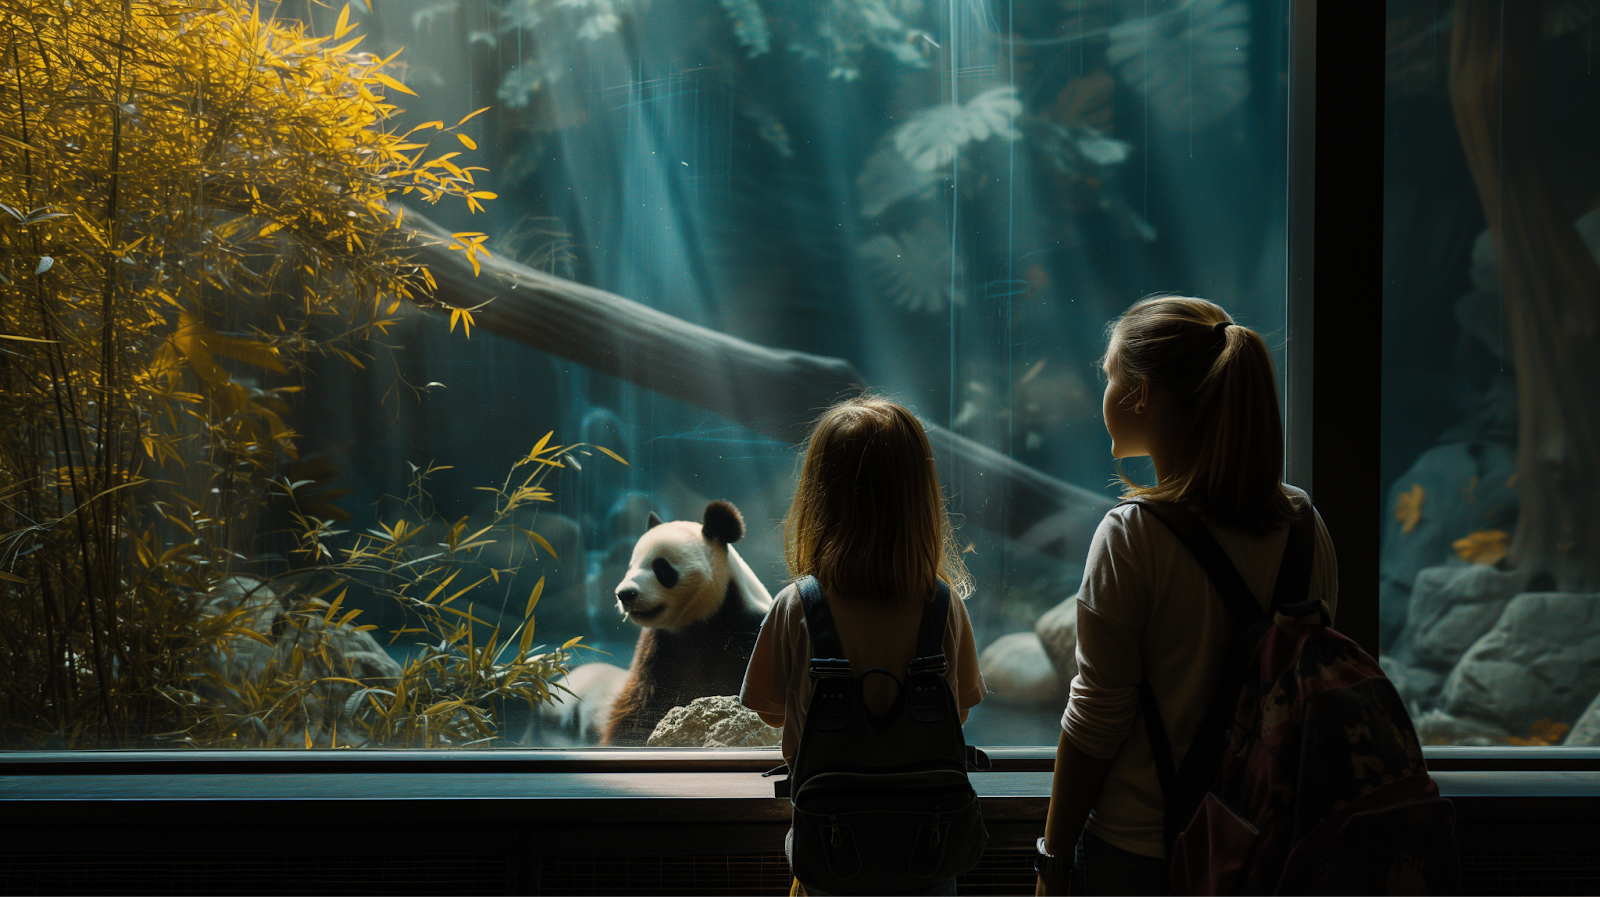 Captivated siblings gaze in awe at a panda in the zoo.